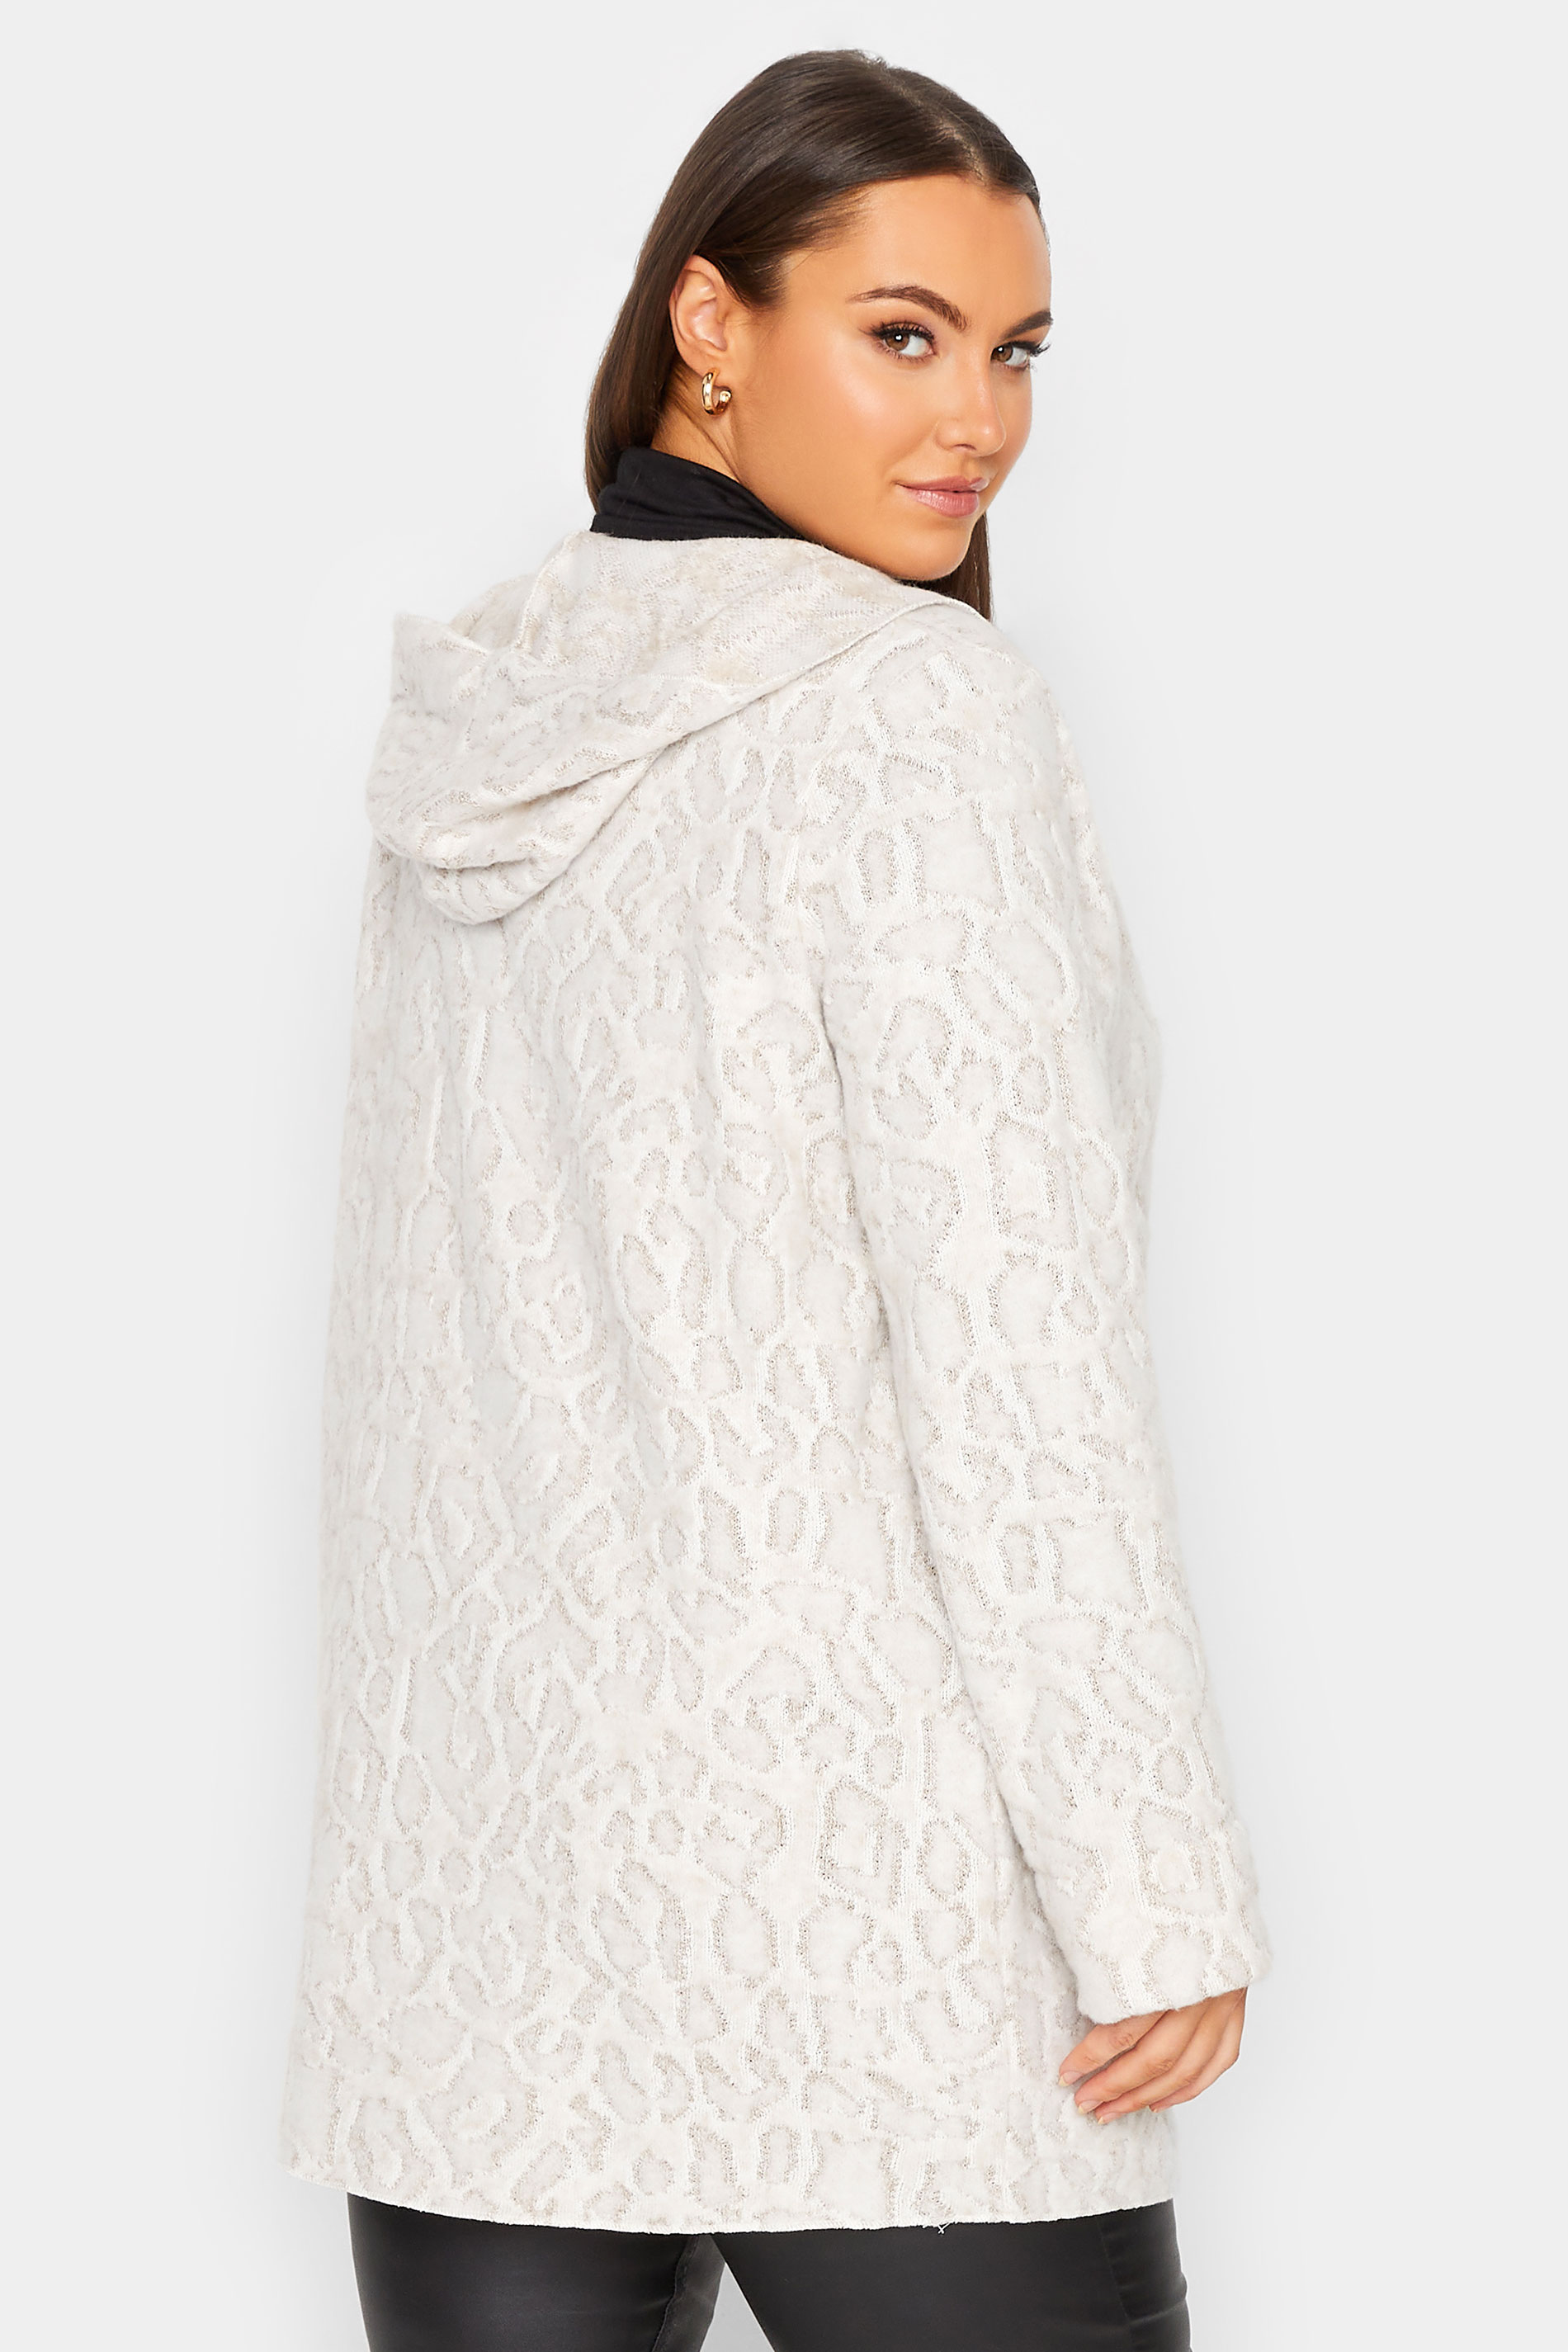 YOURS LUXURY Plus Size White Animal Print Hooded Faux Fur Jacket | Yours Clothing  3